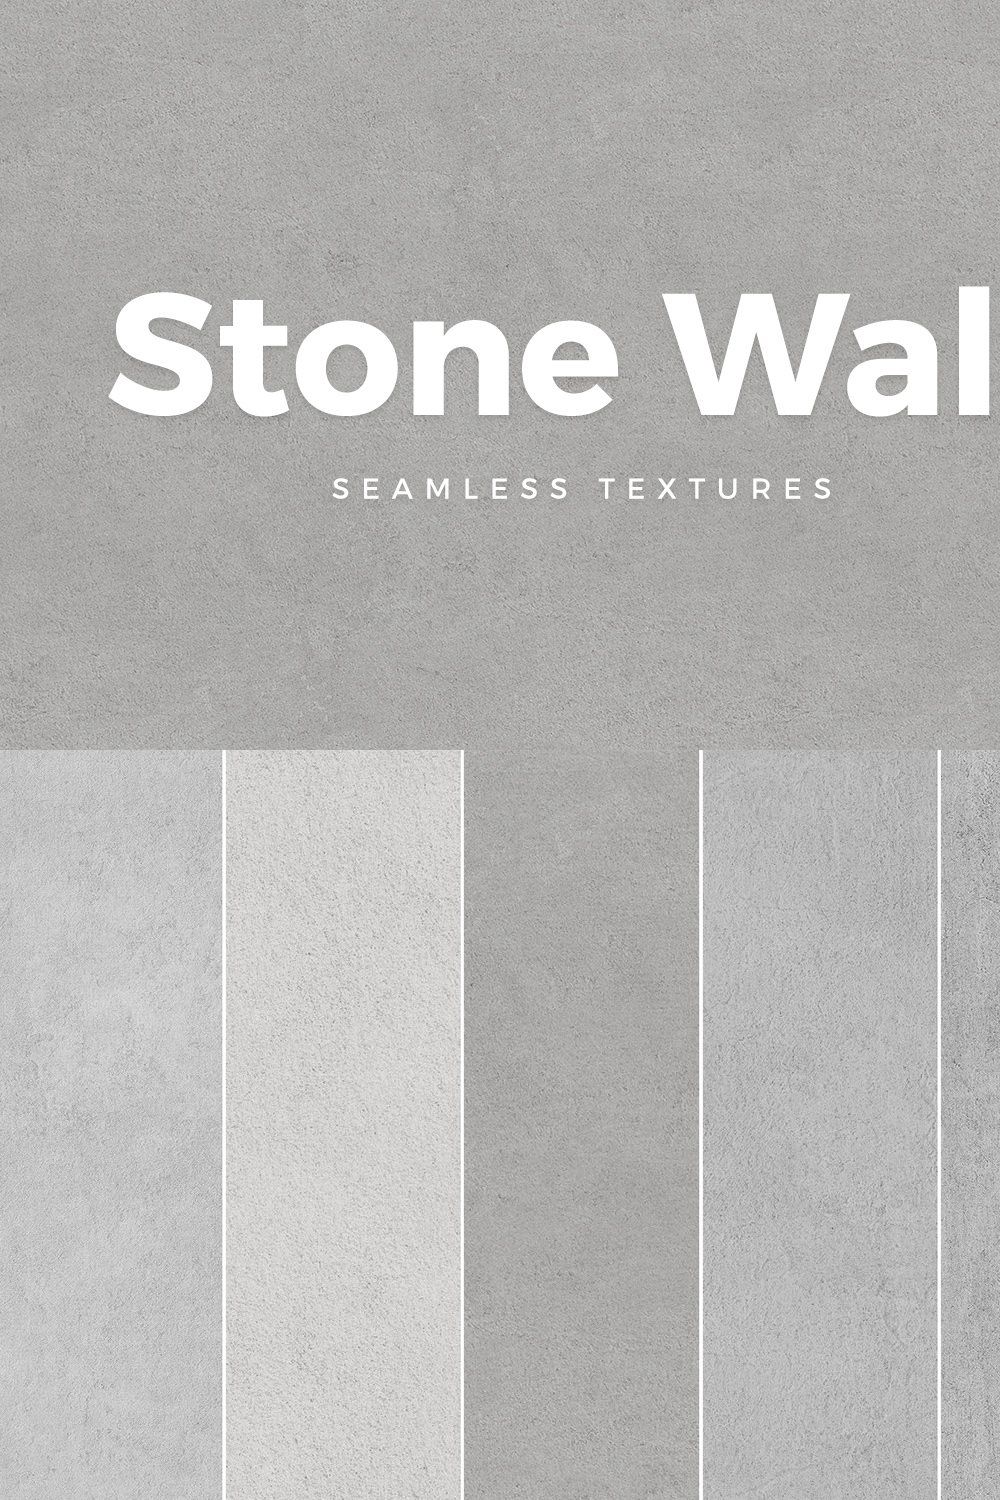 Seamless Stone Wall Textures pinterest preview image.